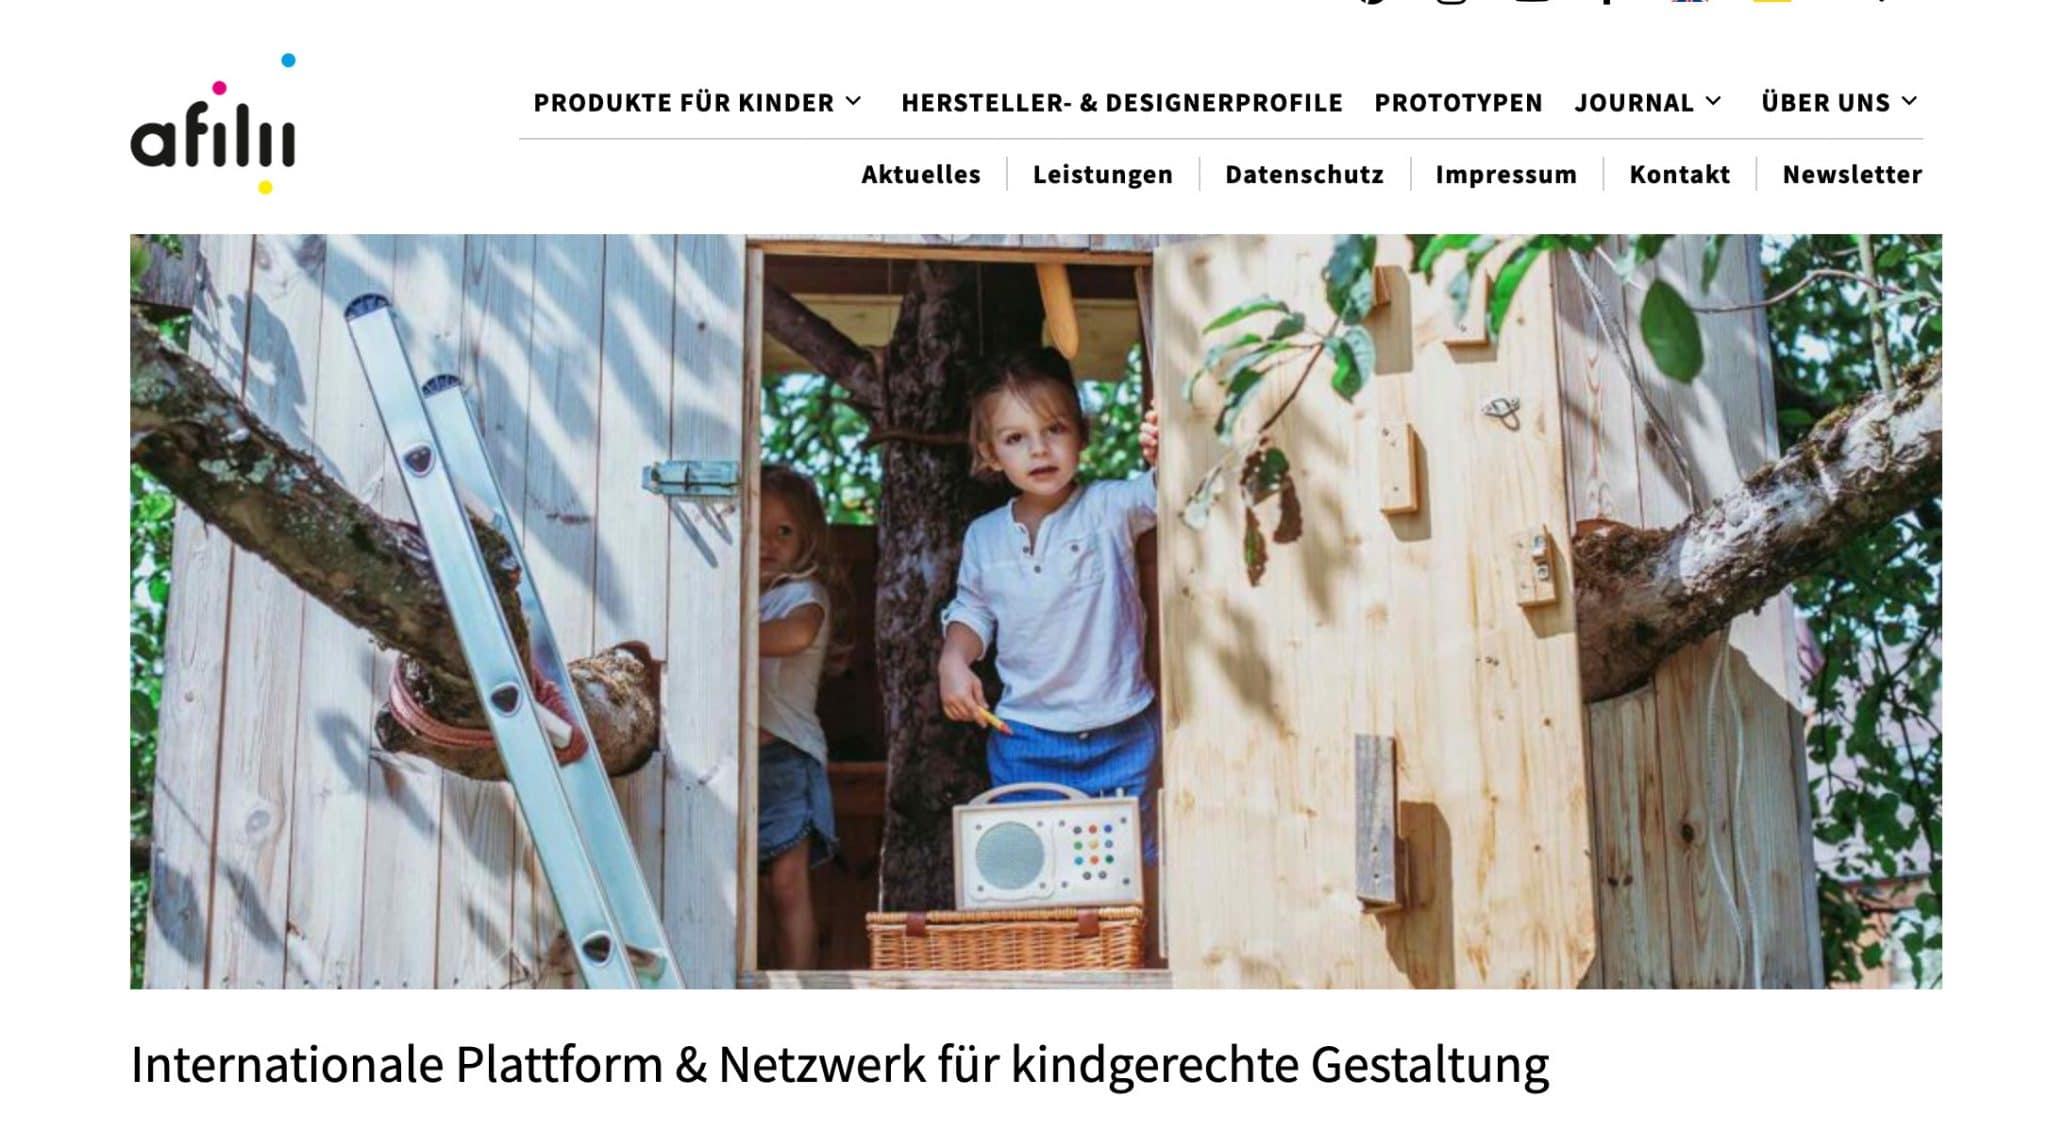 hörbert at afilii. The child-friendly platform for creativity and imagination